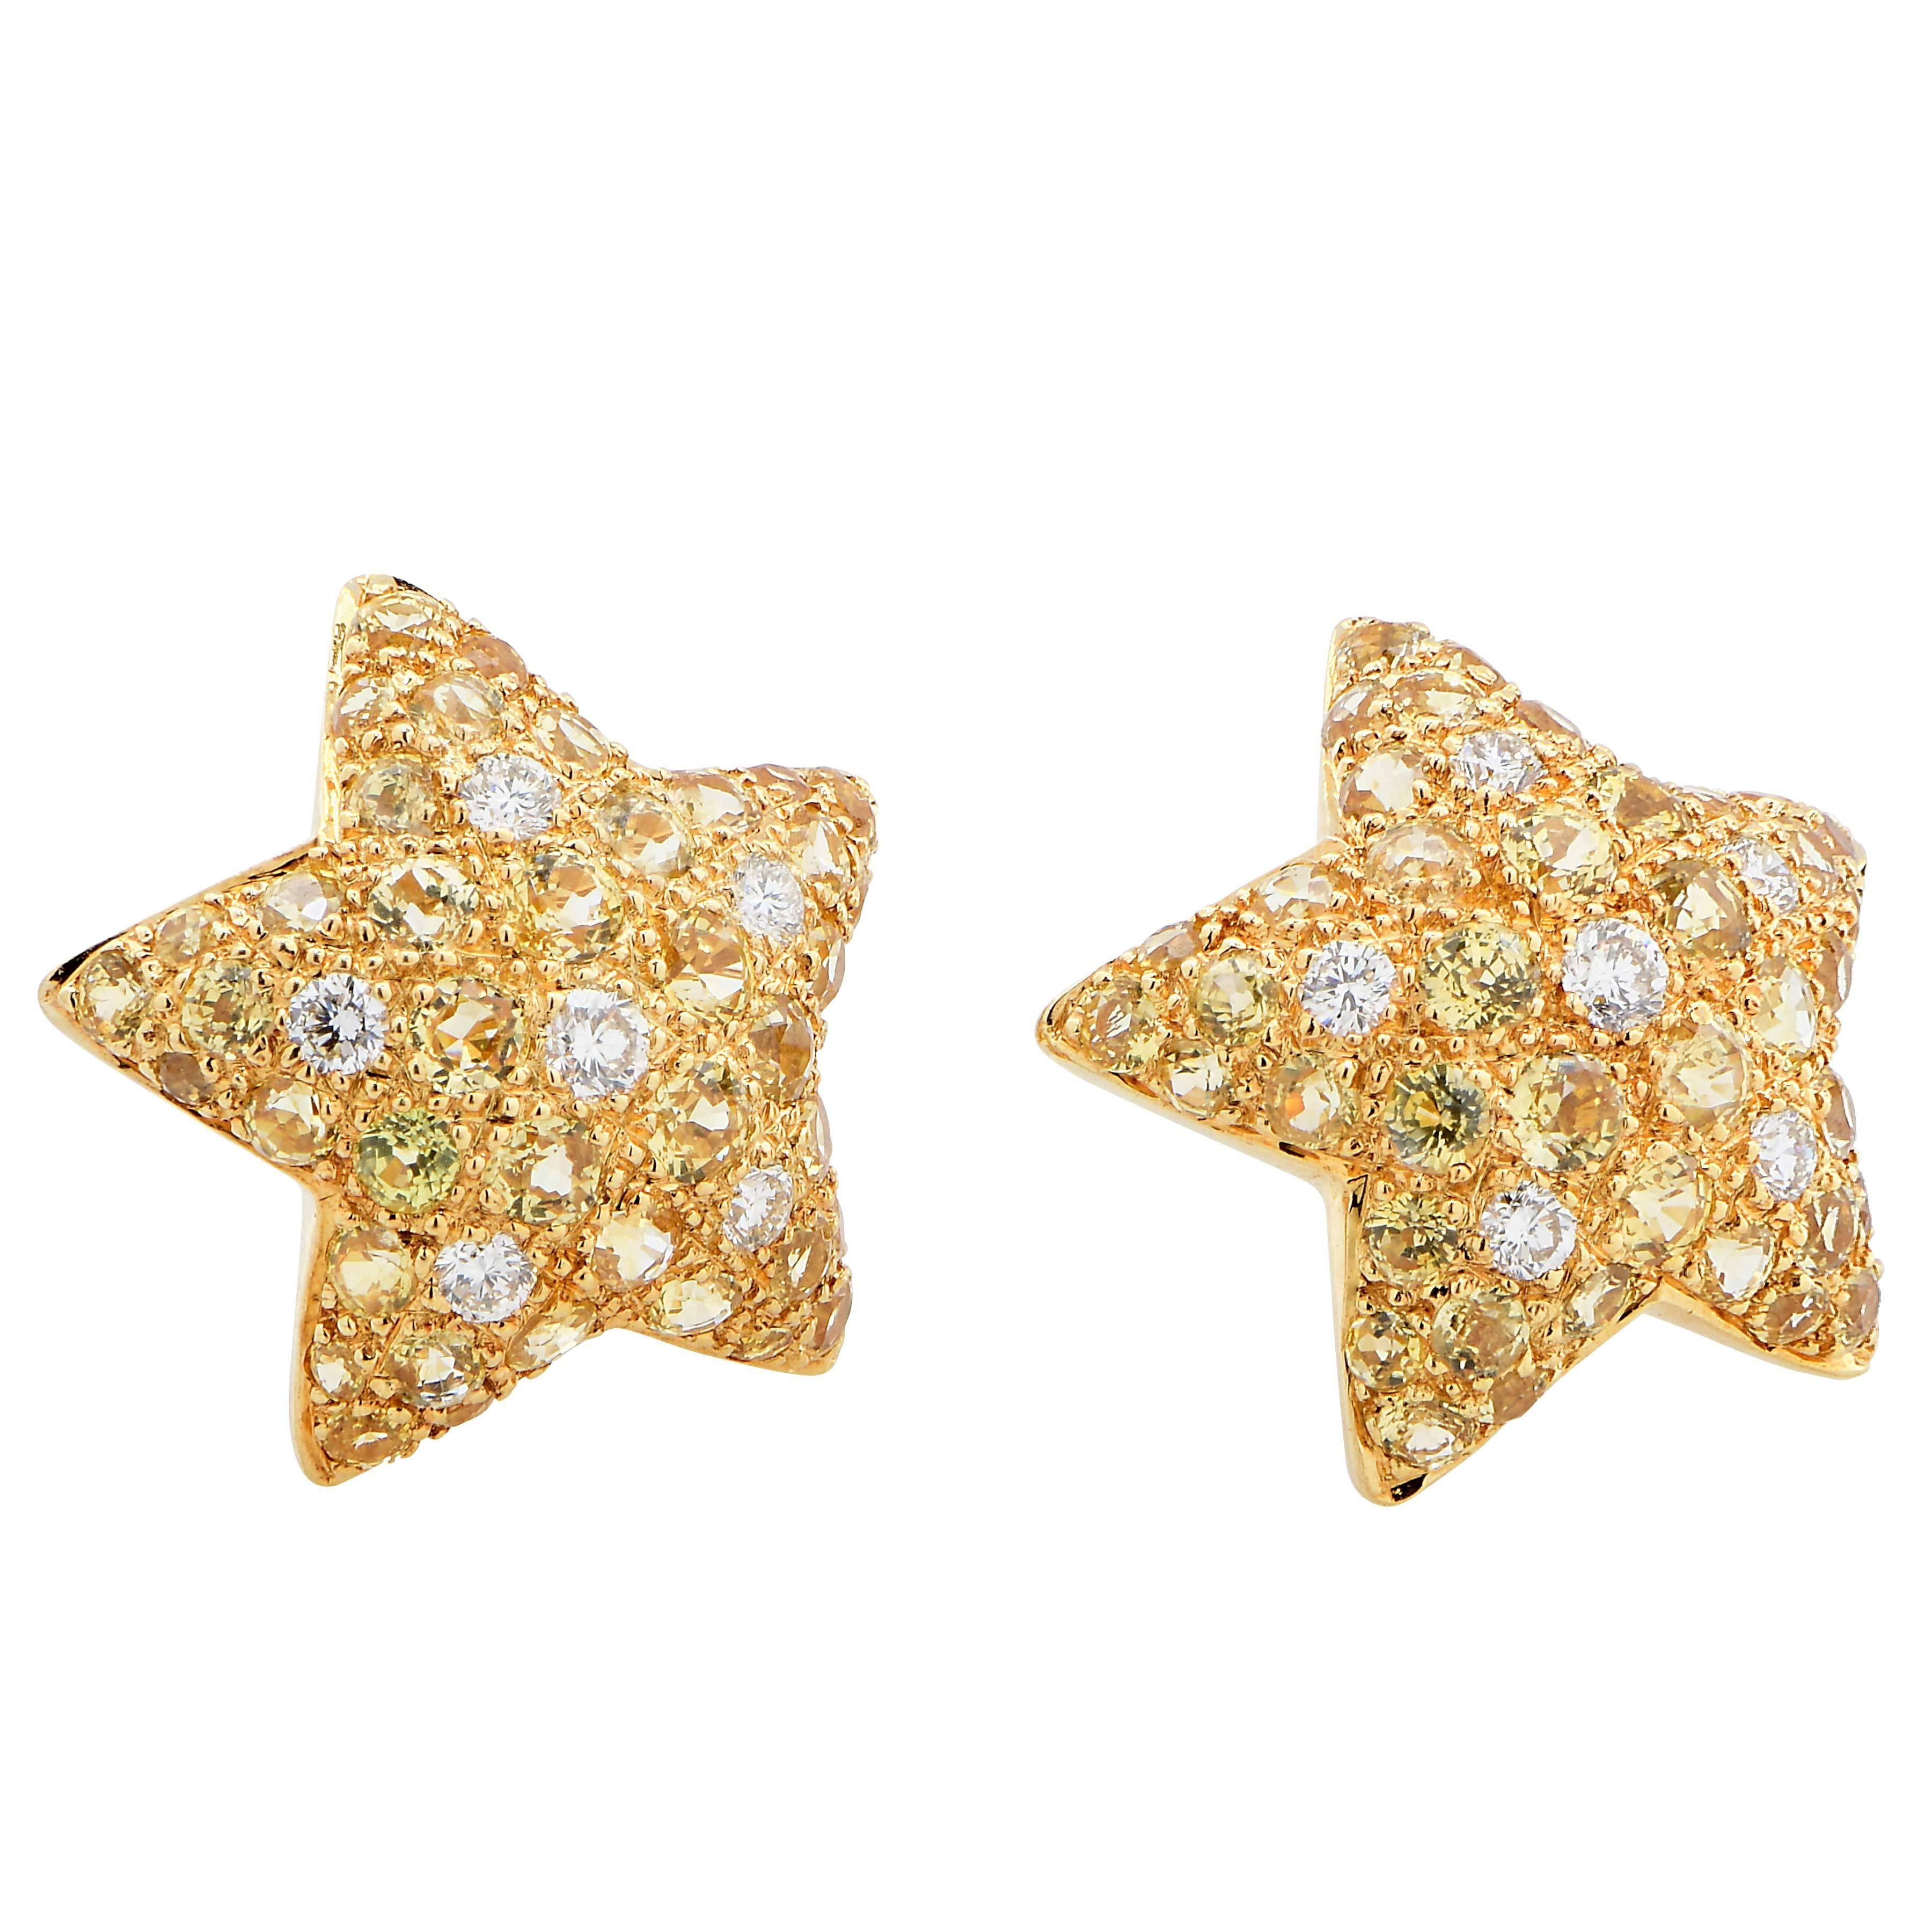 Starfish Motif Diamond and Citrine 18 Karat Yellow Gold Earrings featuring 12 round brilliant cut diamonds with an estimated total weight of .30 carat and 70 round cut citrines with an estimated weight of 1 carat.
Metal Type: 18 Karat Yellow